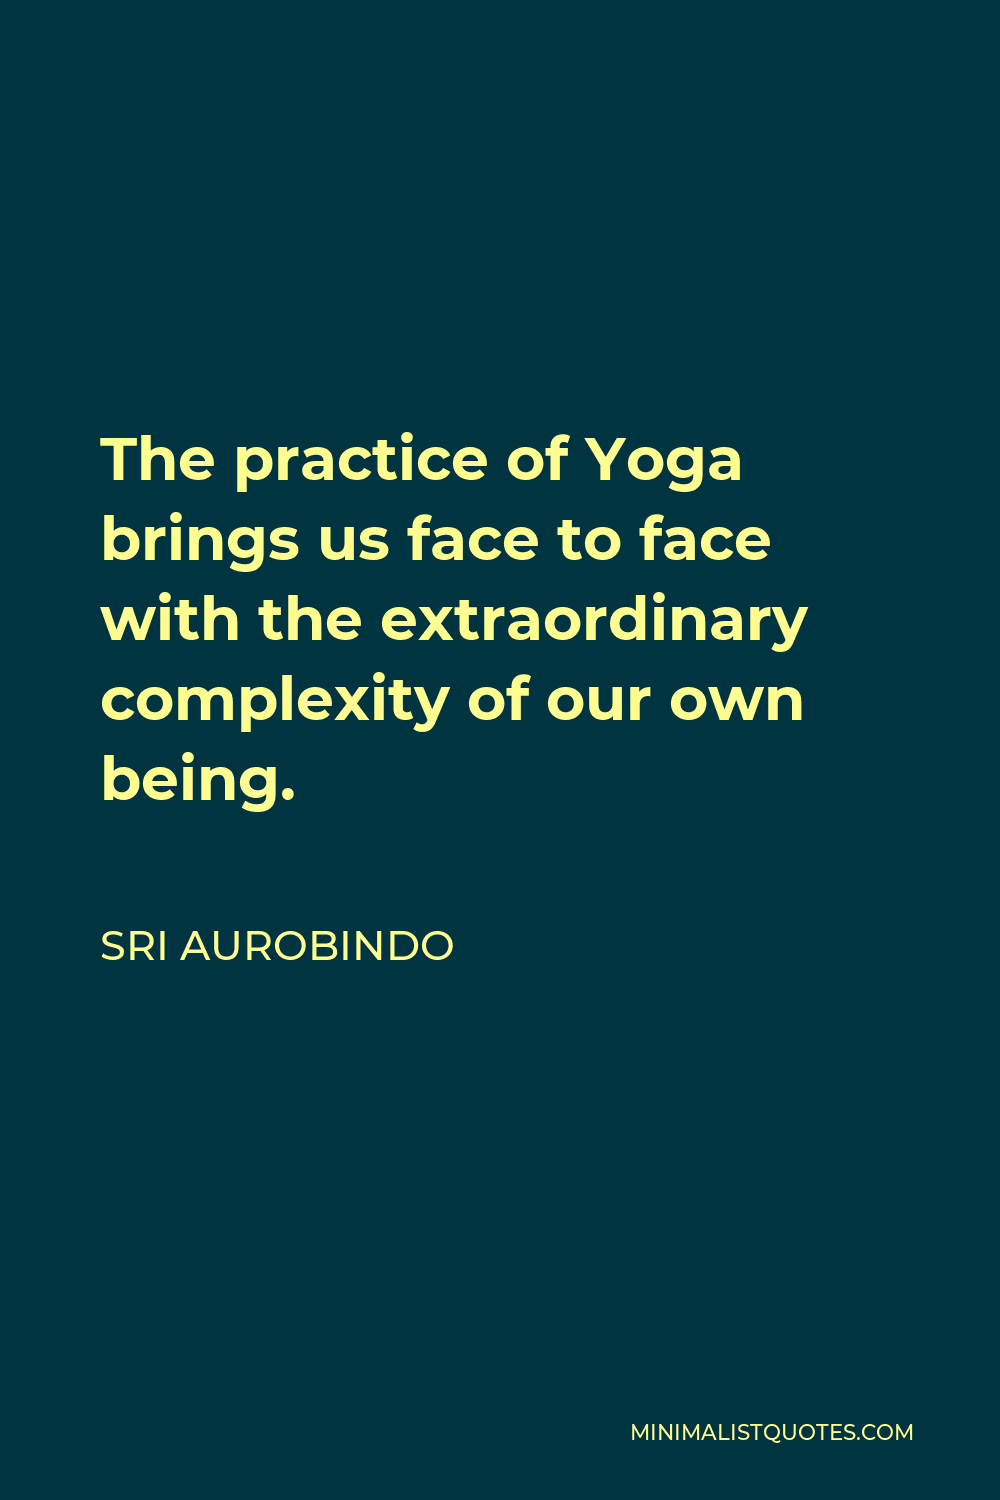 Sri Aurobindo Quote - The practice of Yoga brings us face to face with the extraordinary complexity of our own being.